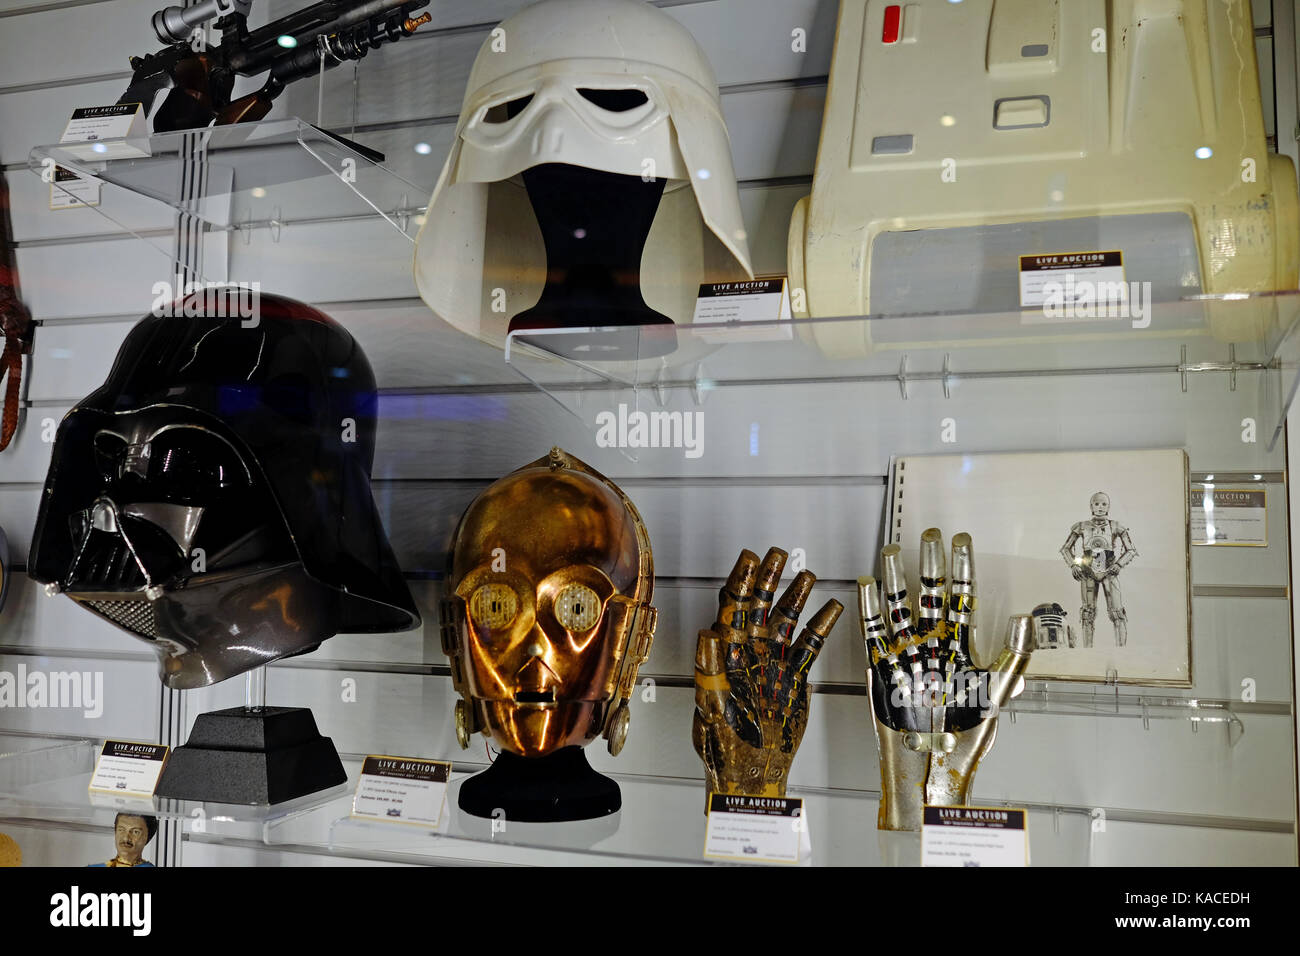 Exhibition in advance of the live auction at the BFI IMAX on 26th September 2017 of TV and movie memorabilia including real Star Wars props Stock Photo